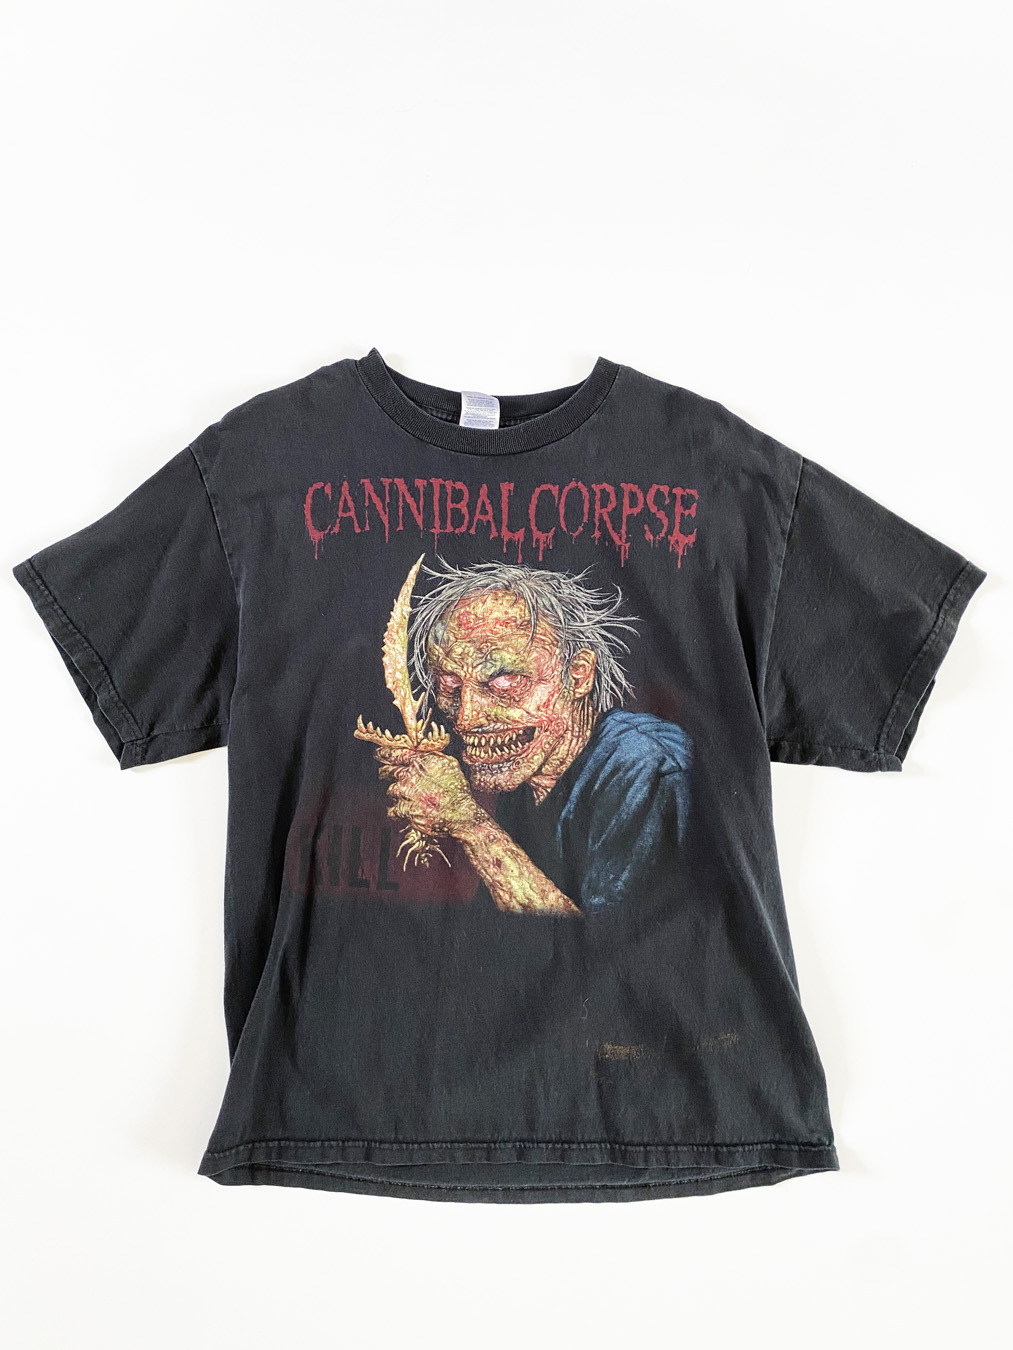 2006 Cannibal Corpse KILL T-Shirt Large - 5 Star Vintage